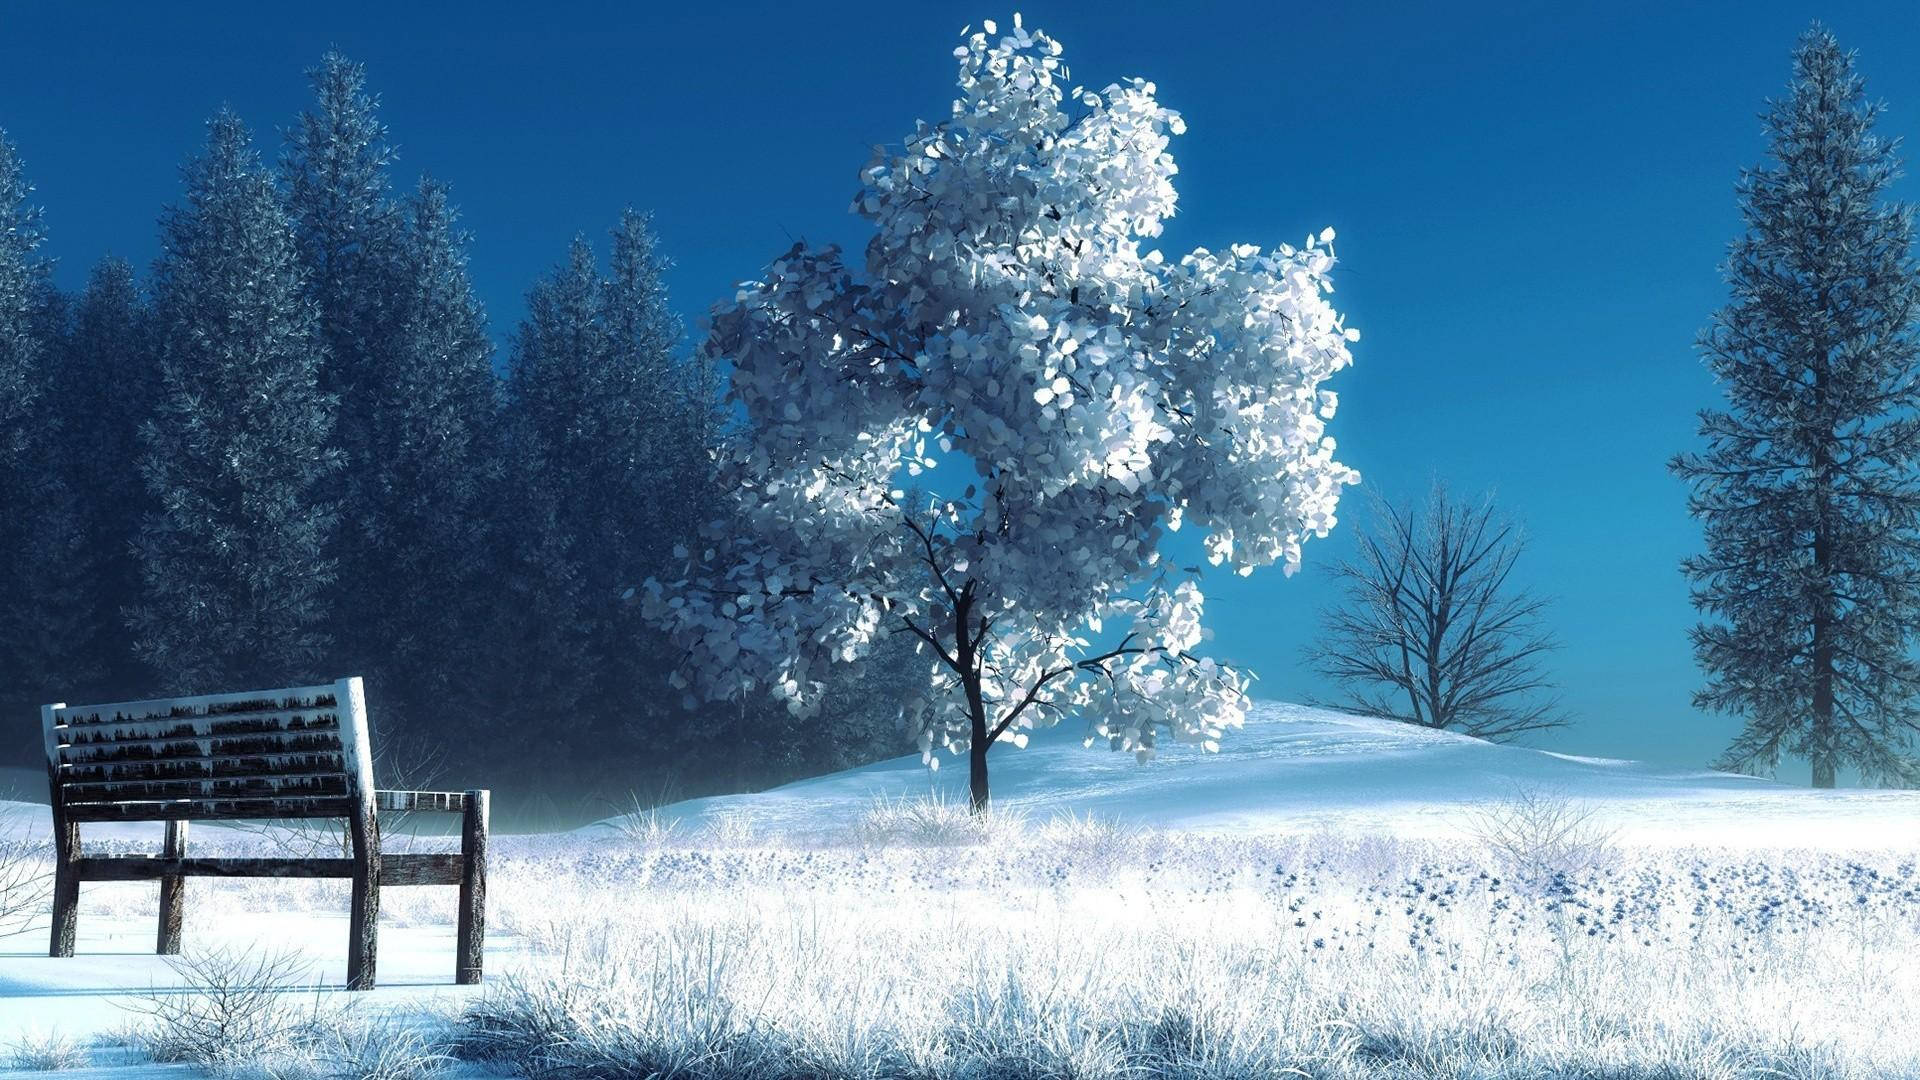 1080p Hd Bench And Trees During Winter Background